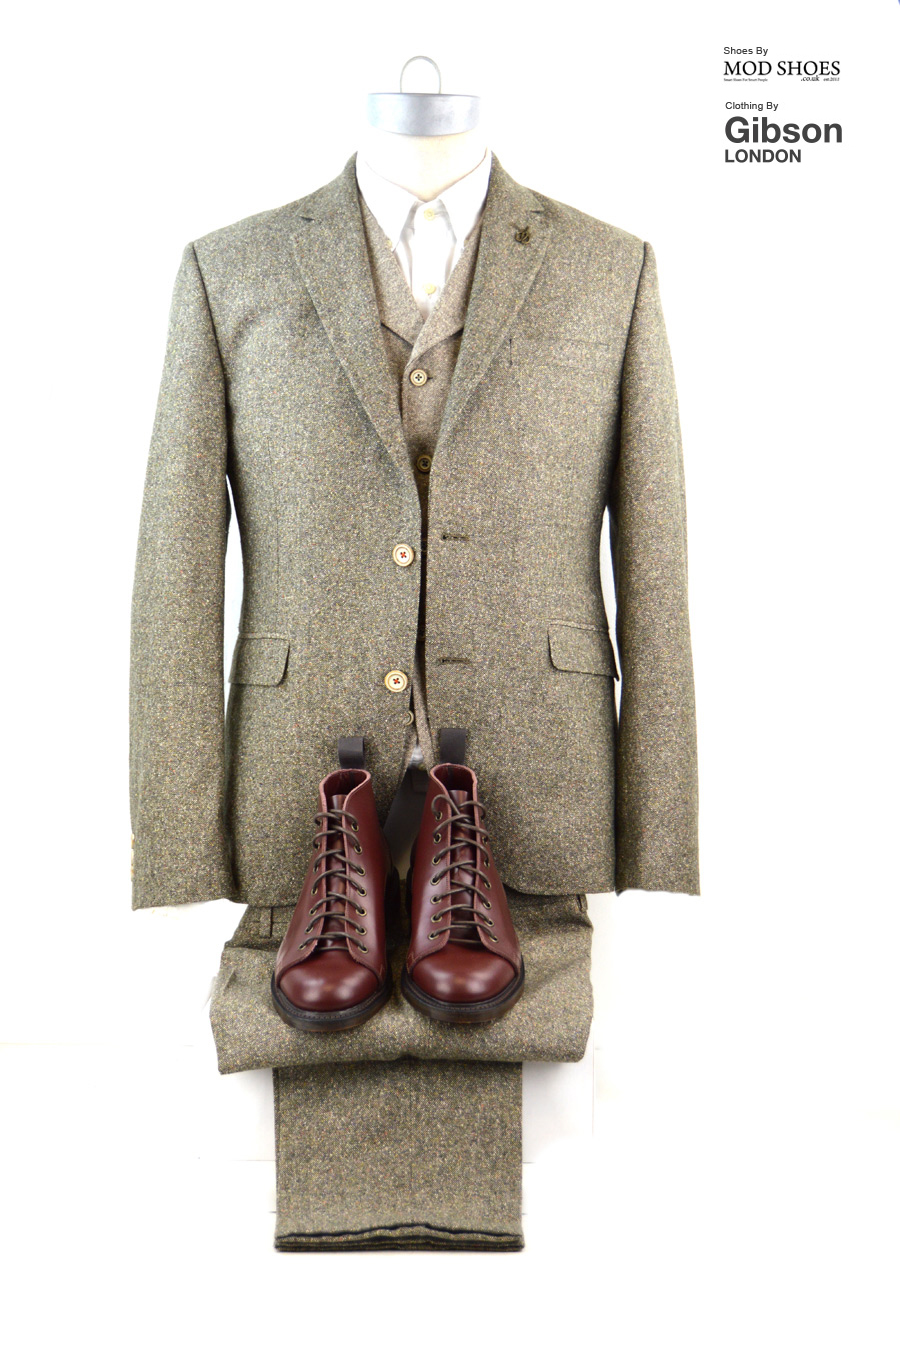 modshoes-monkey-boots-oxblood-with-Gibson-suit-01